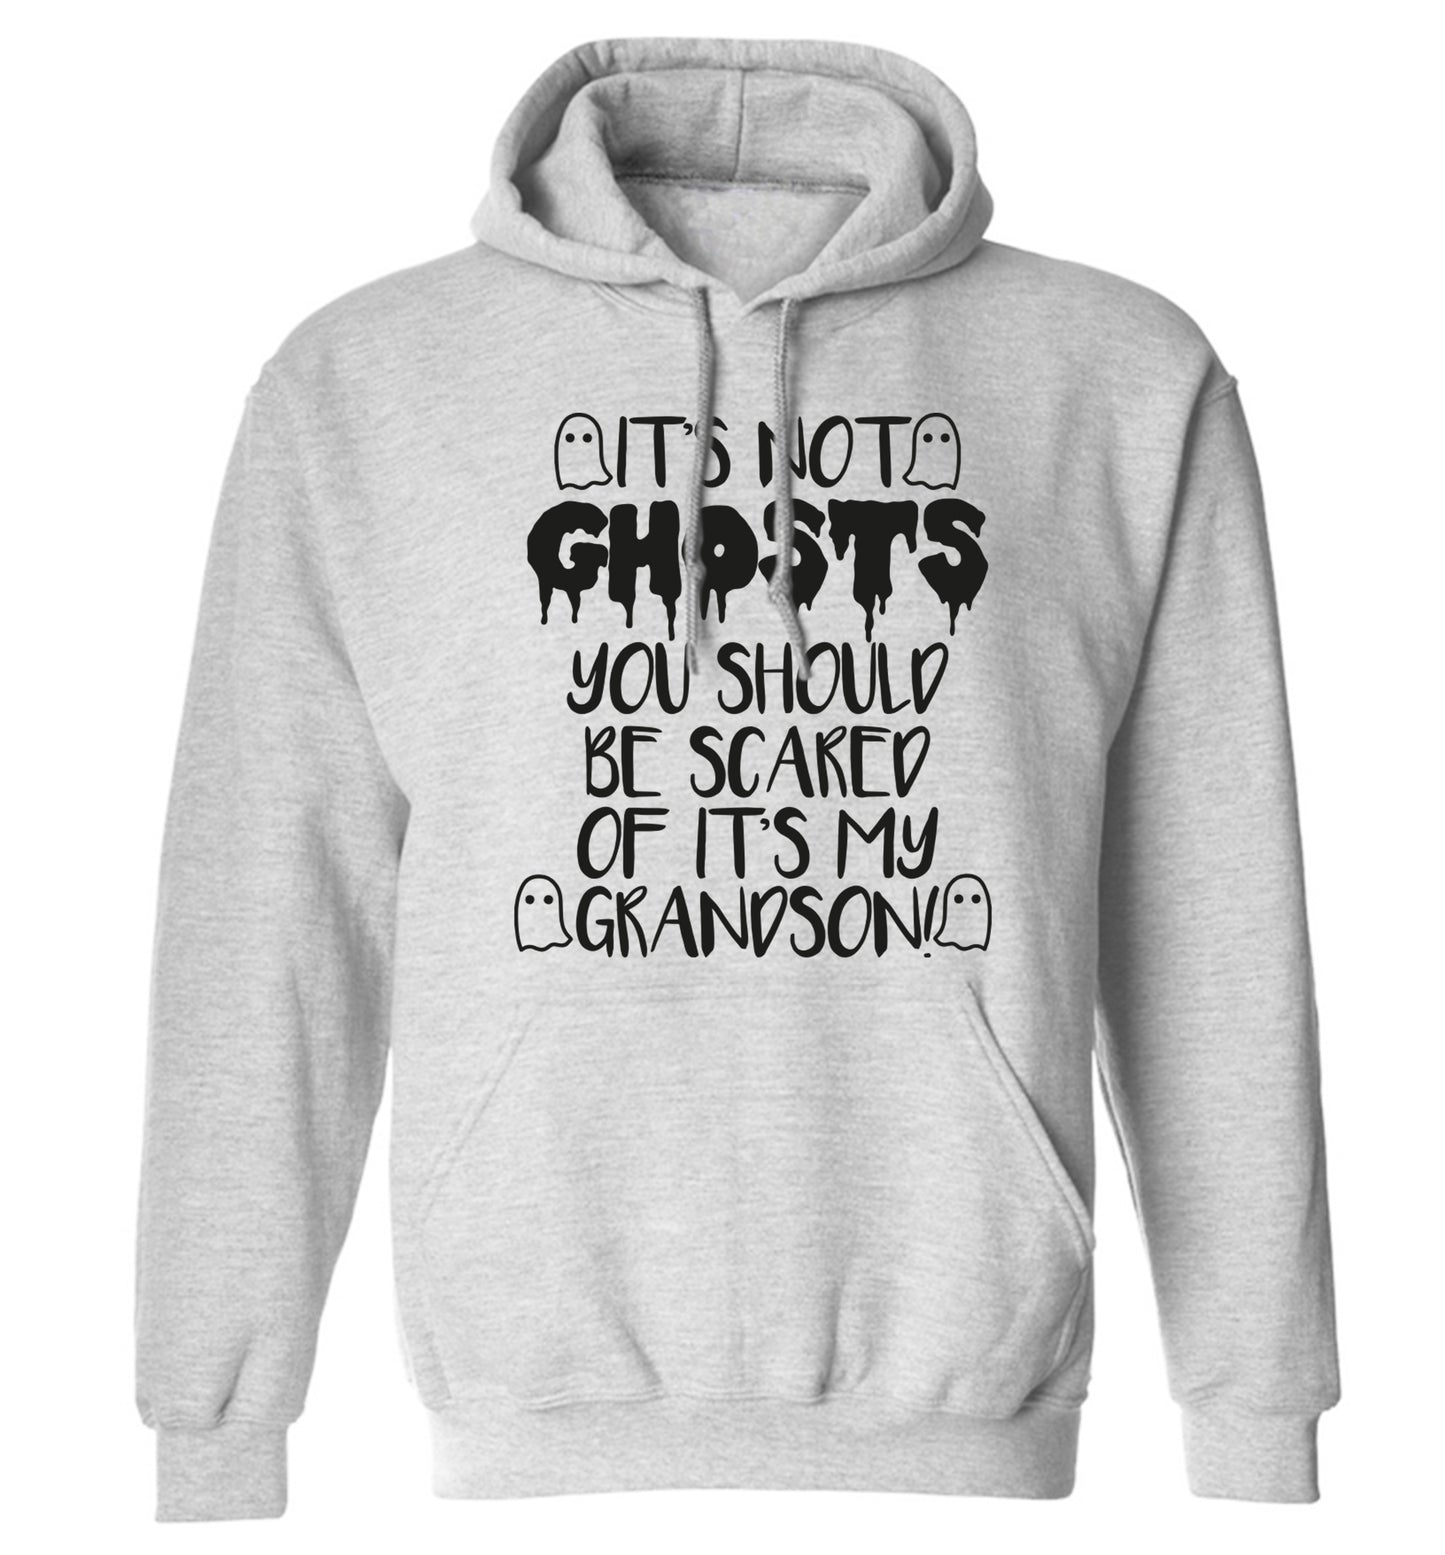 It's not ghosts you should be scared of it's my grandson! adults unisex grey hoodie 2XL